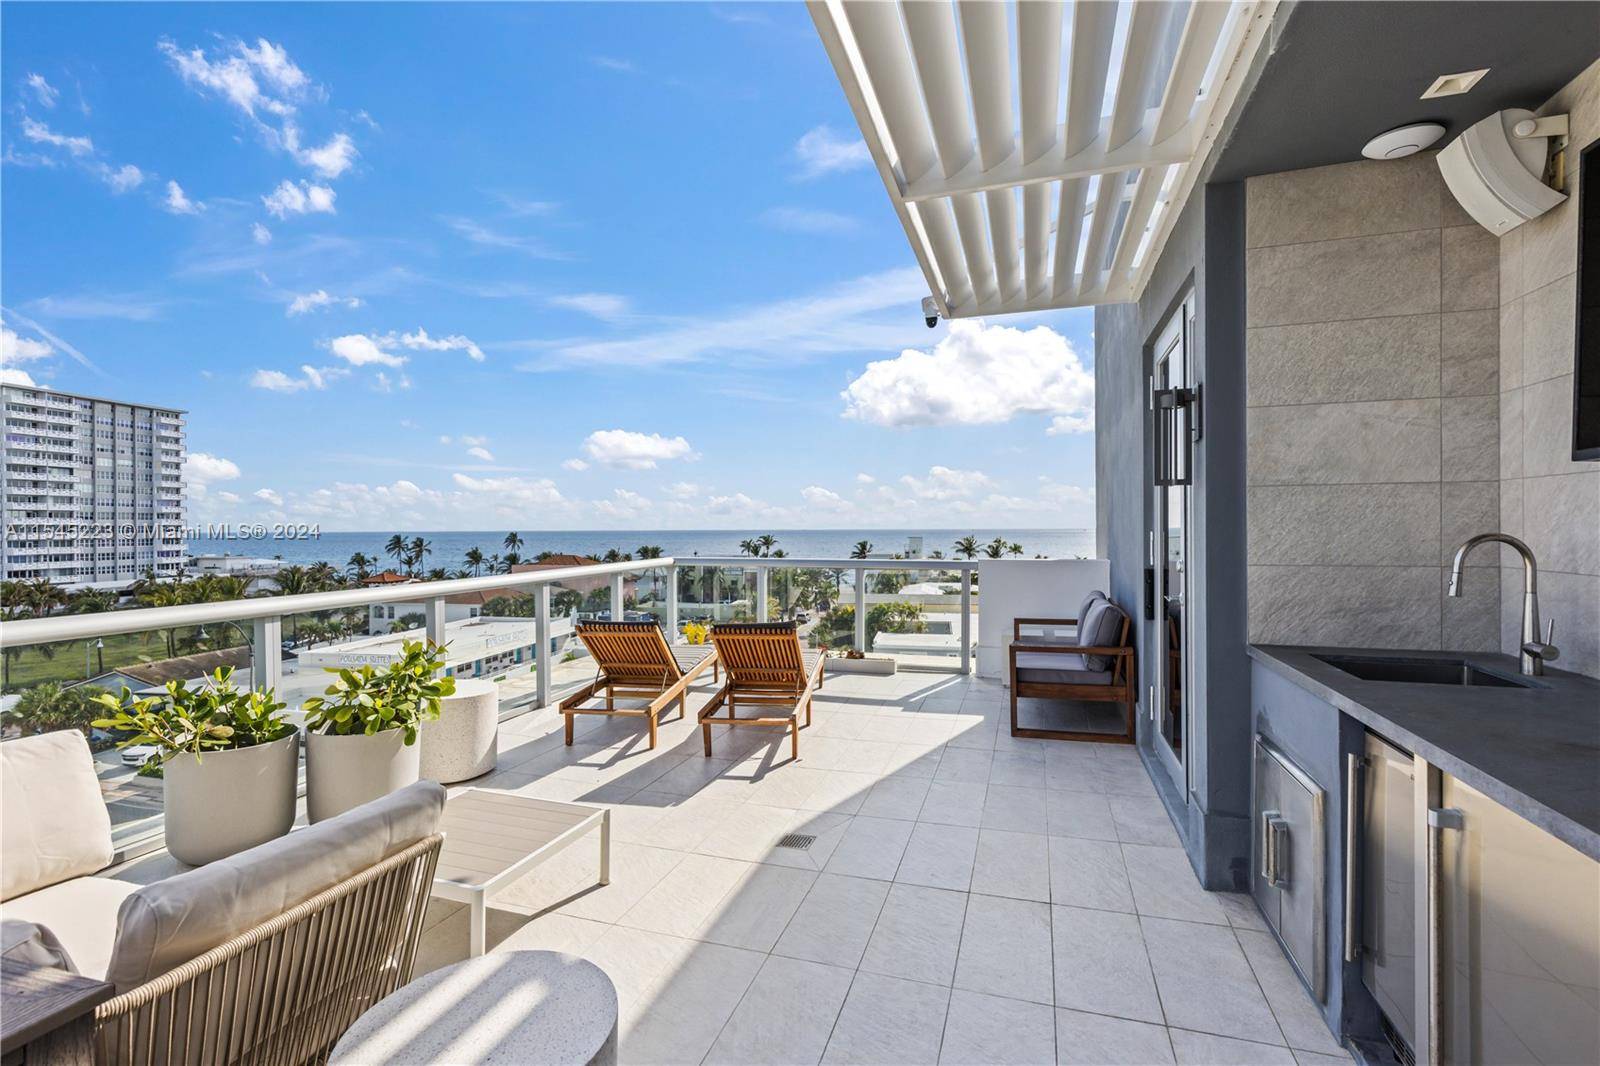 Experience the ultimate luxury living in this 5 story waterfront corner townhome, boasting a 55' foot private boat slip on the Intracoastal and steps the beach.